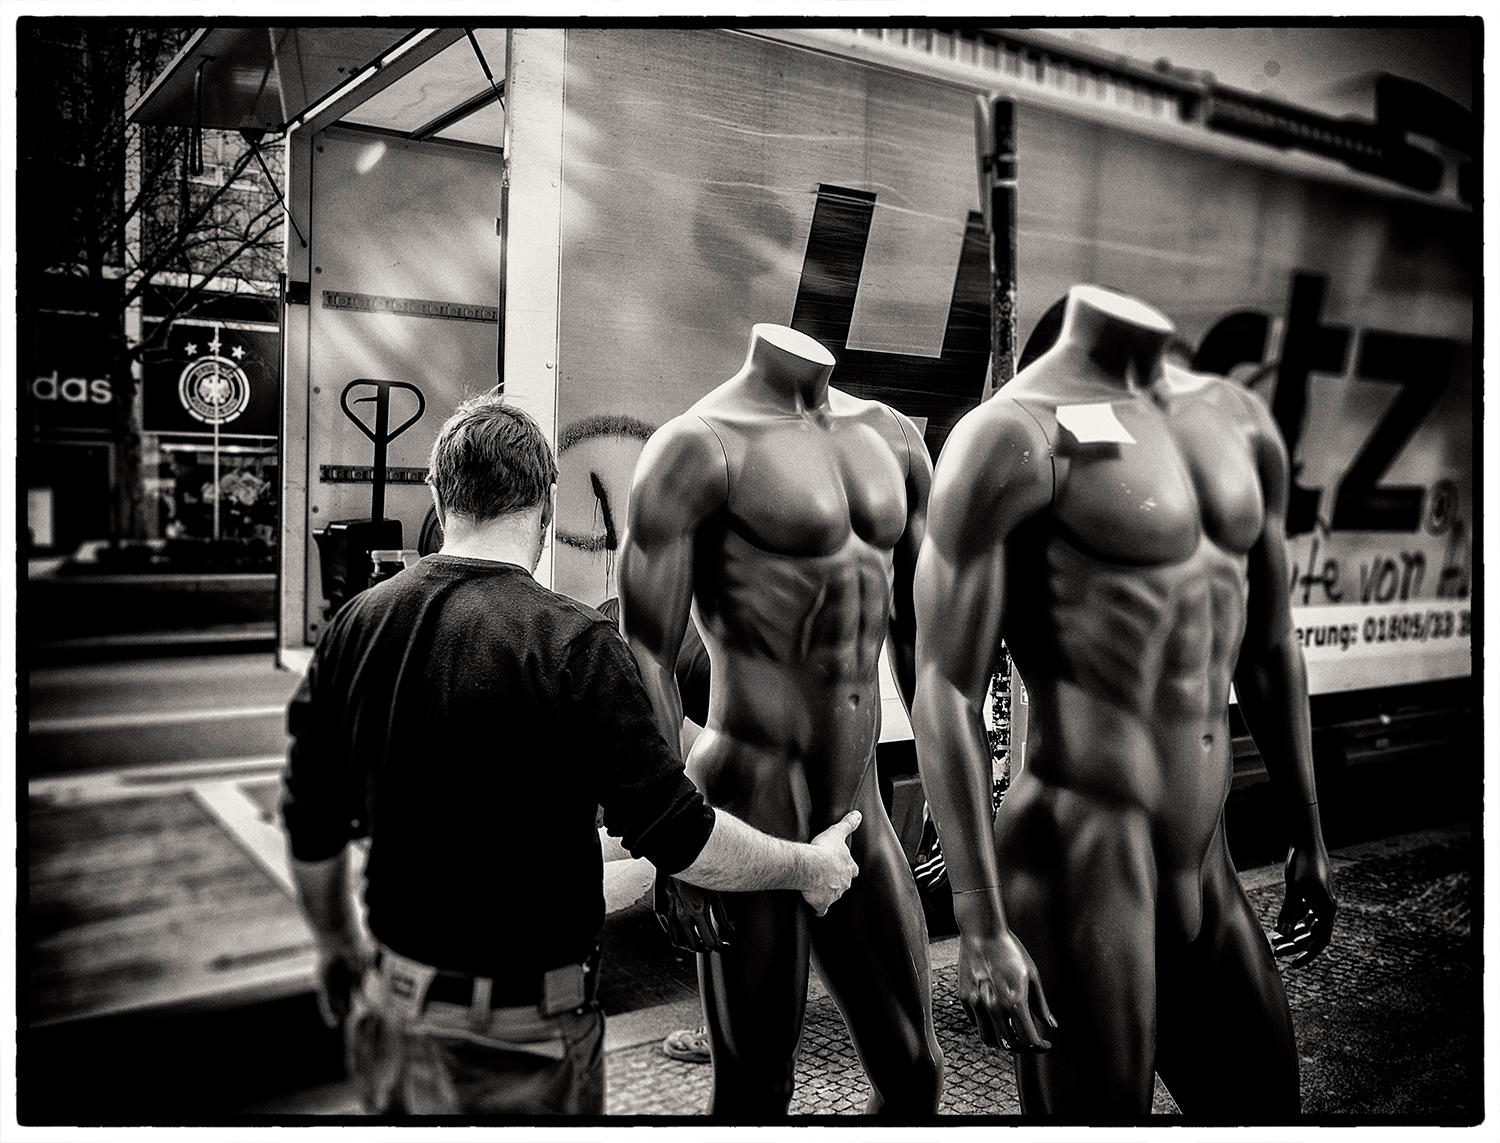 Edition of 25
signed and numbered by the artist

An employee of a transportation company is unloading mannequins and grabs a mannequin's crotch.

JJK is a pseudonym for one of the world's most successful photo artists.
In his series "Always in my